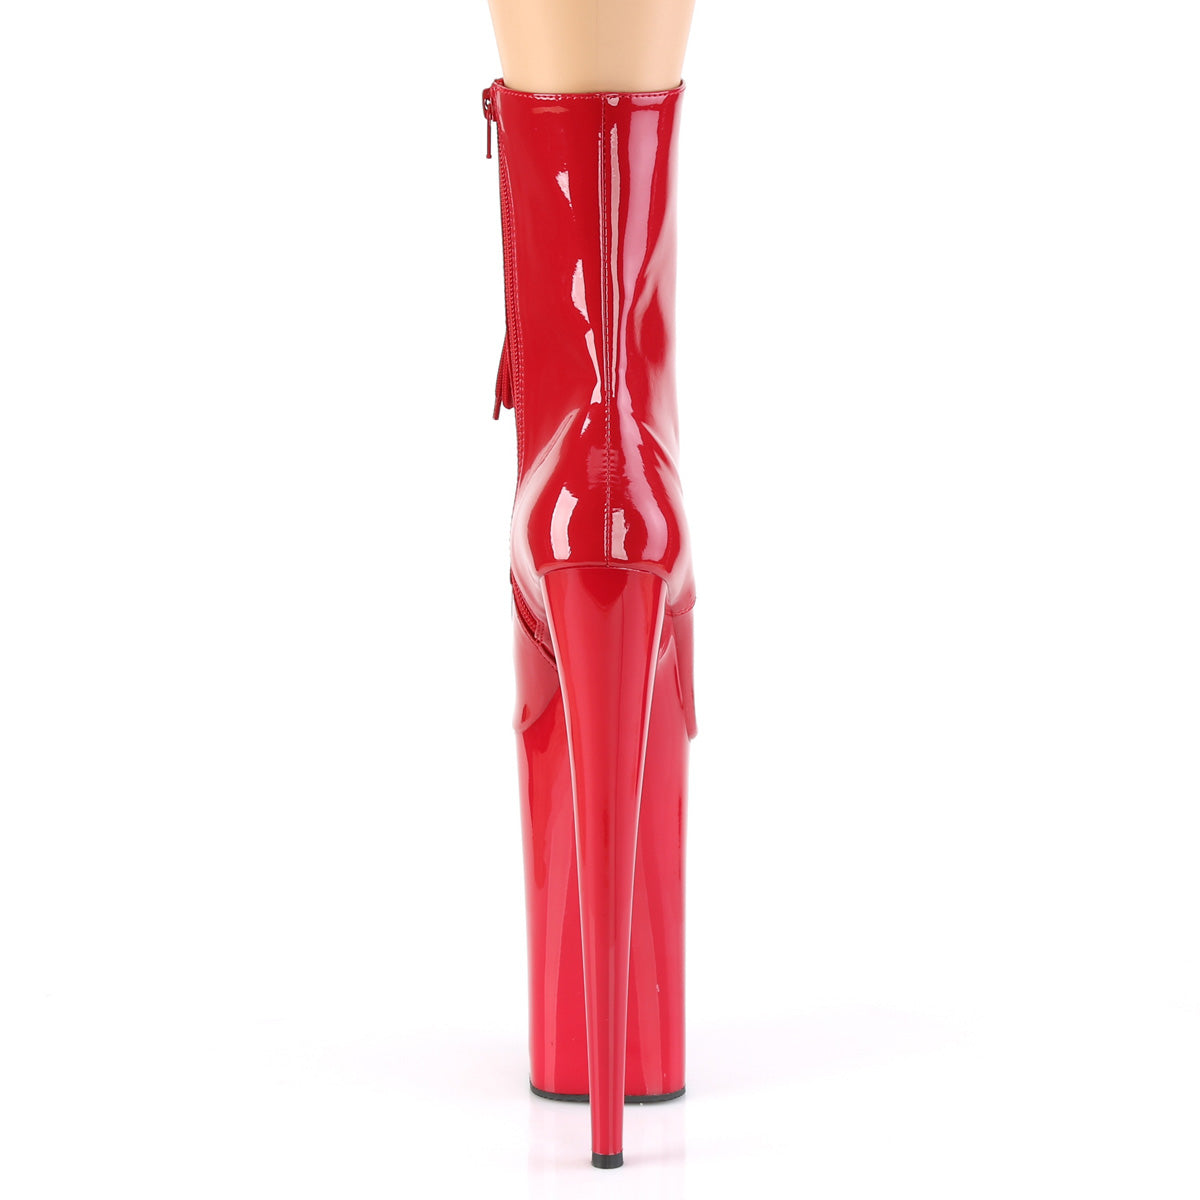 BEYOND-1020 Pleaser Red Patent/Red Platform Shoes [Extreme High Heels]